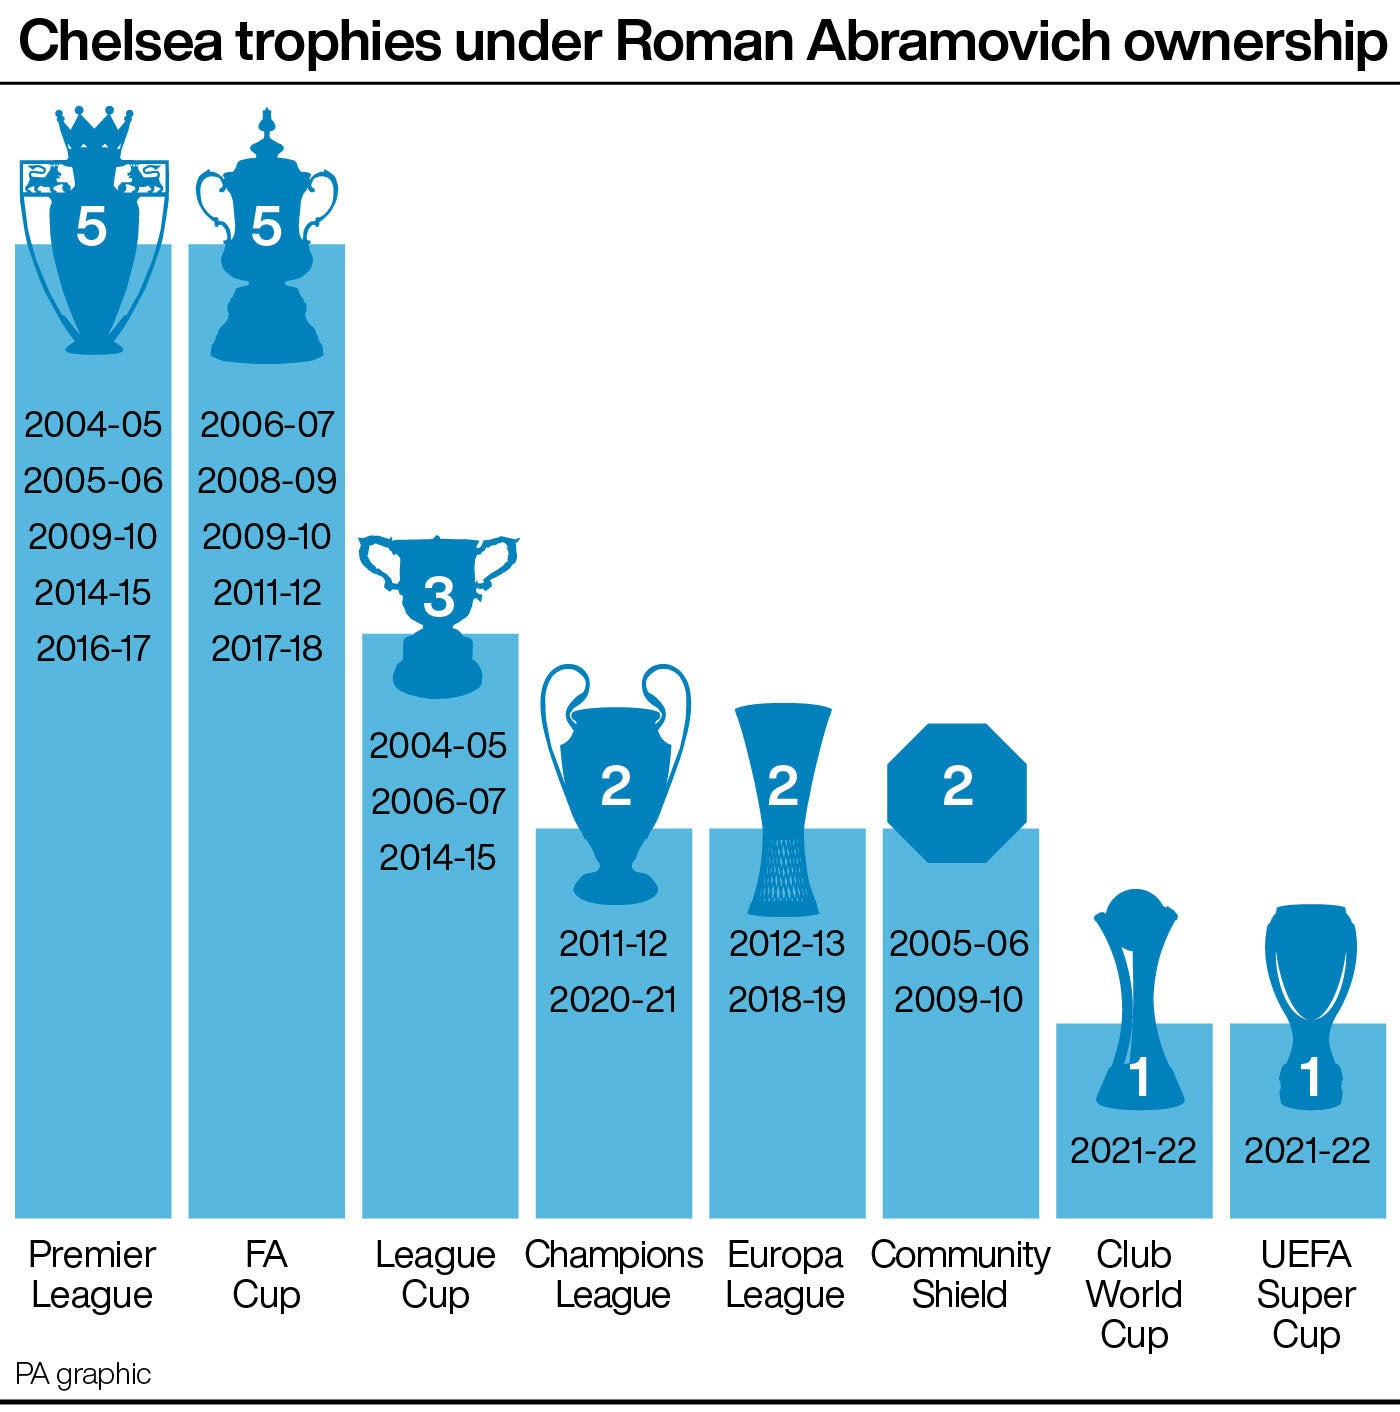 The club have won 19 major trophies under his ownership